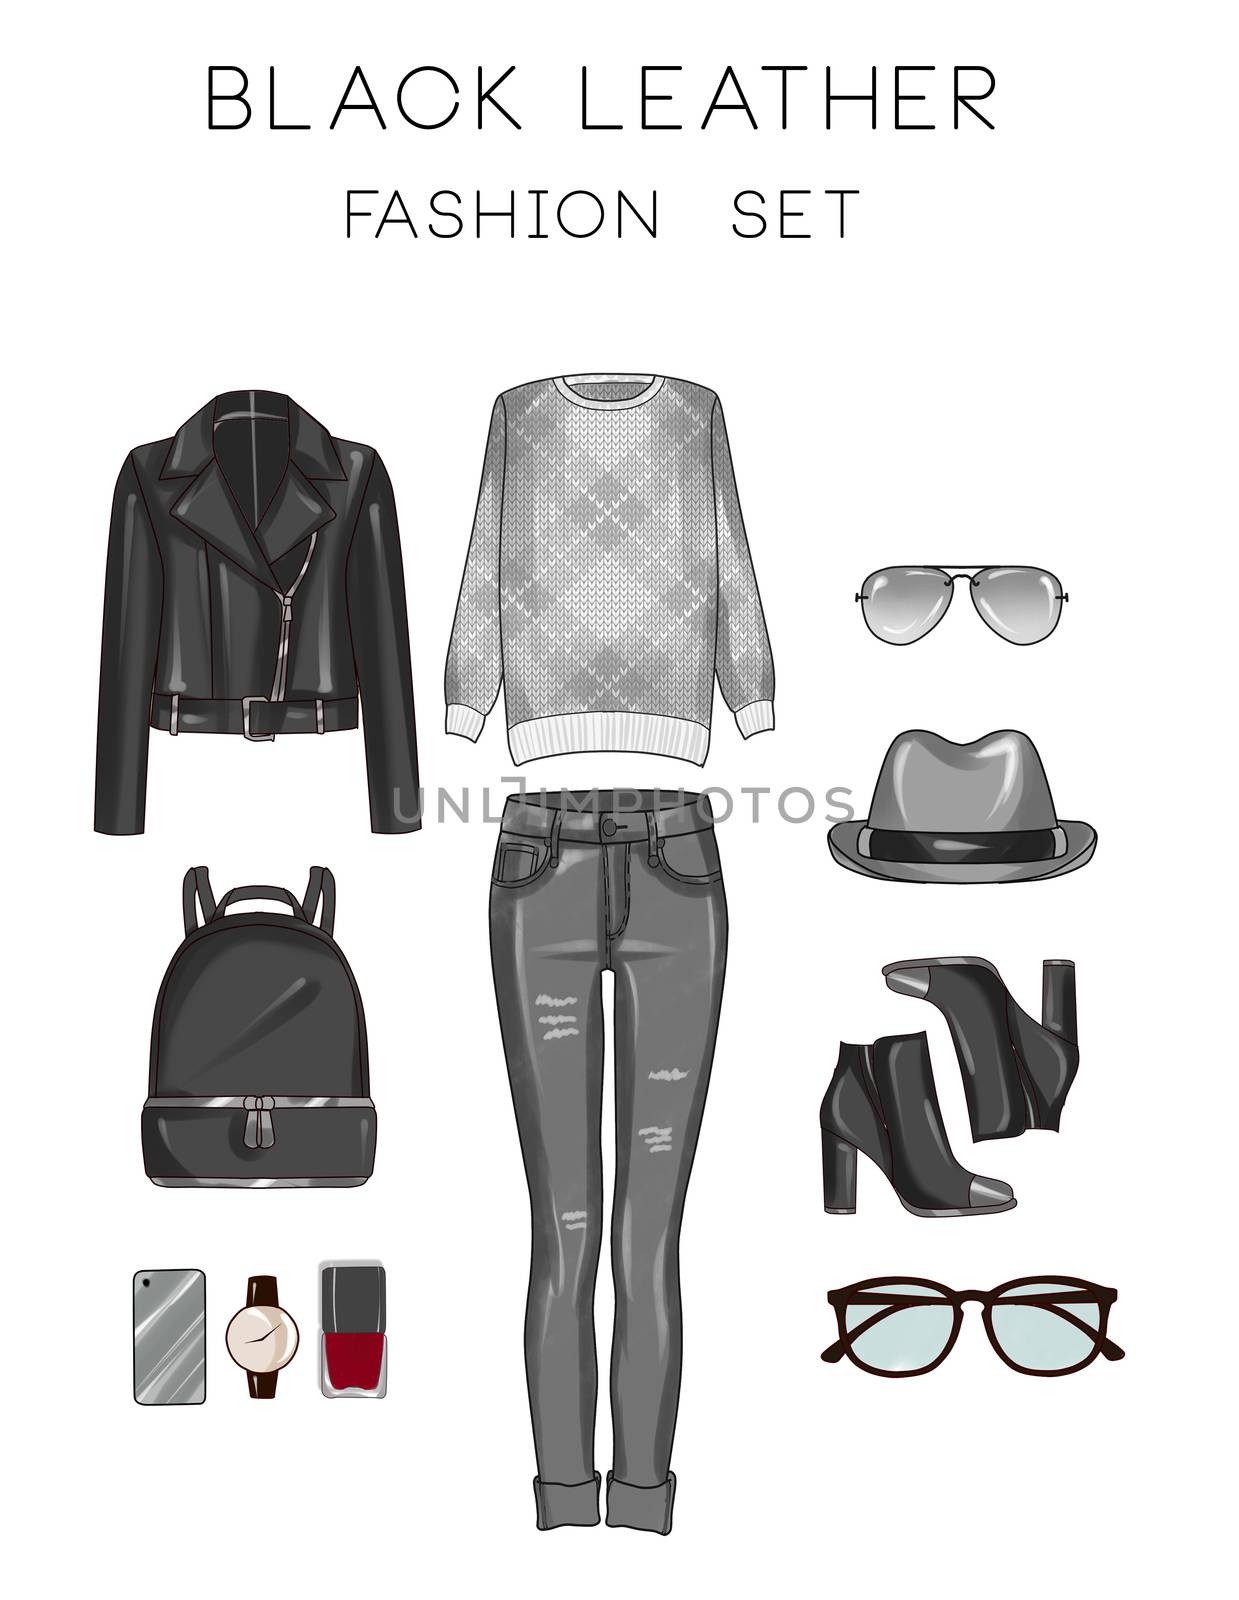 Fashion set of woman's clothes and accessories - Black leather biker jacket, jeans, sweater, sunglasses, boots, bag, make up, hat by GGillustrations